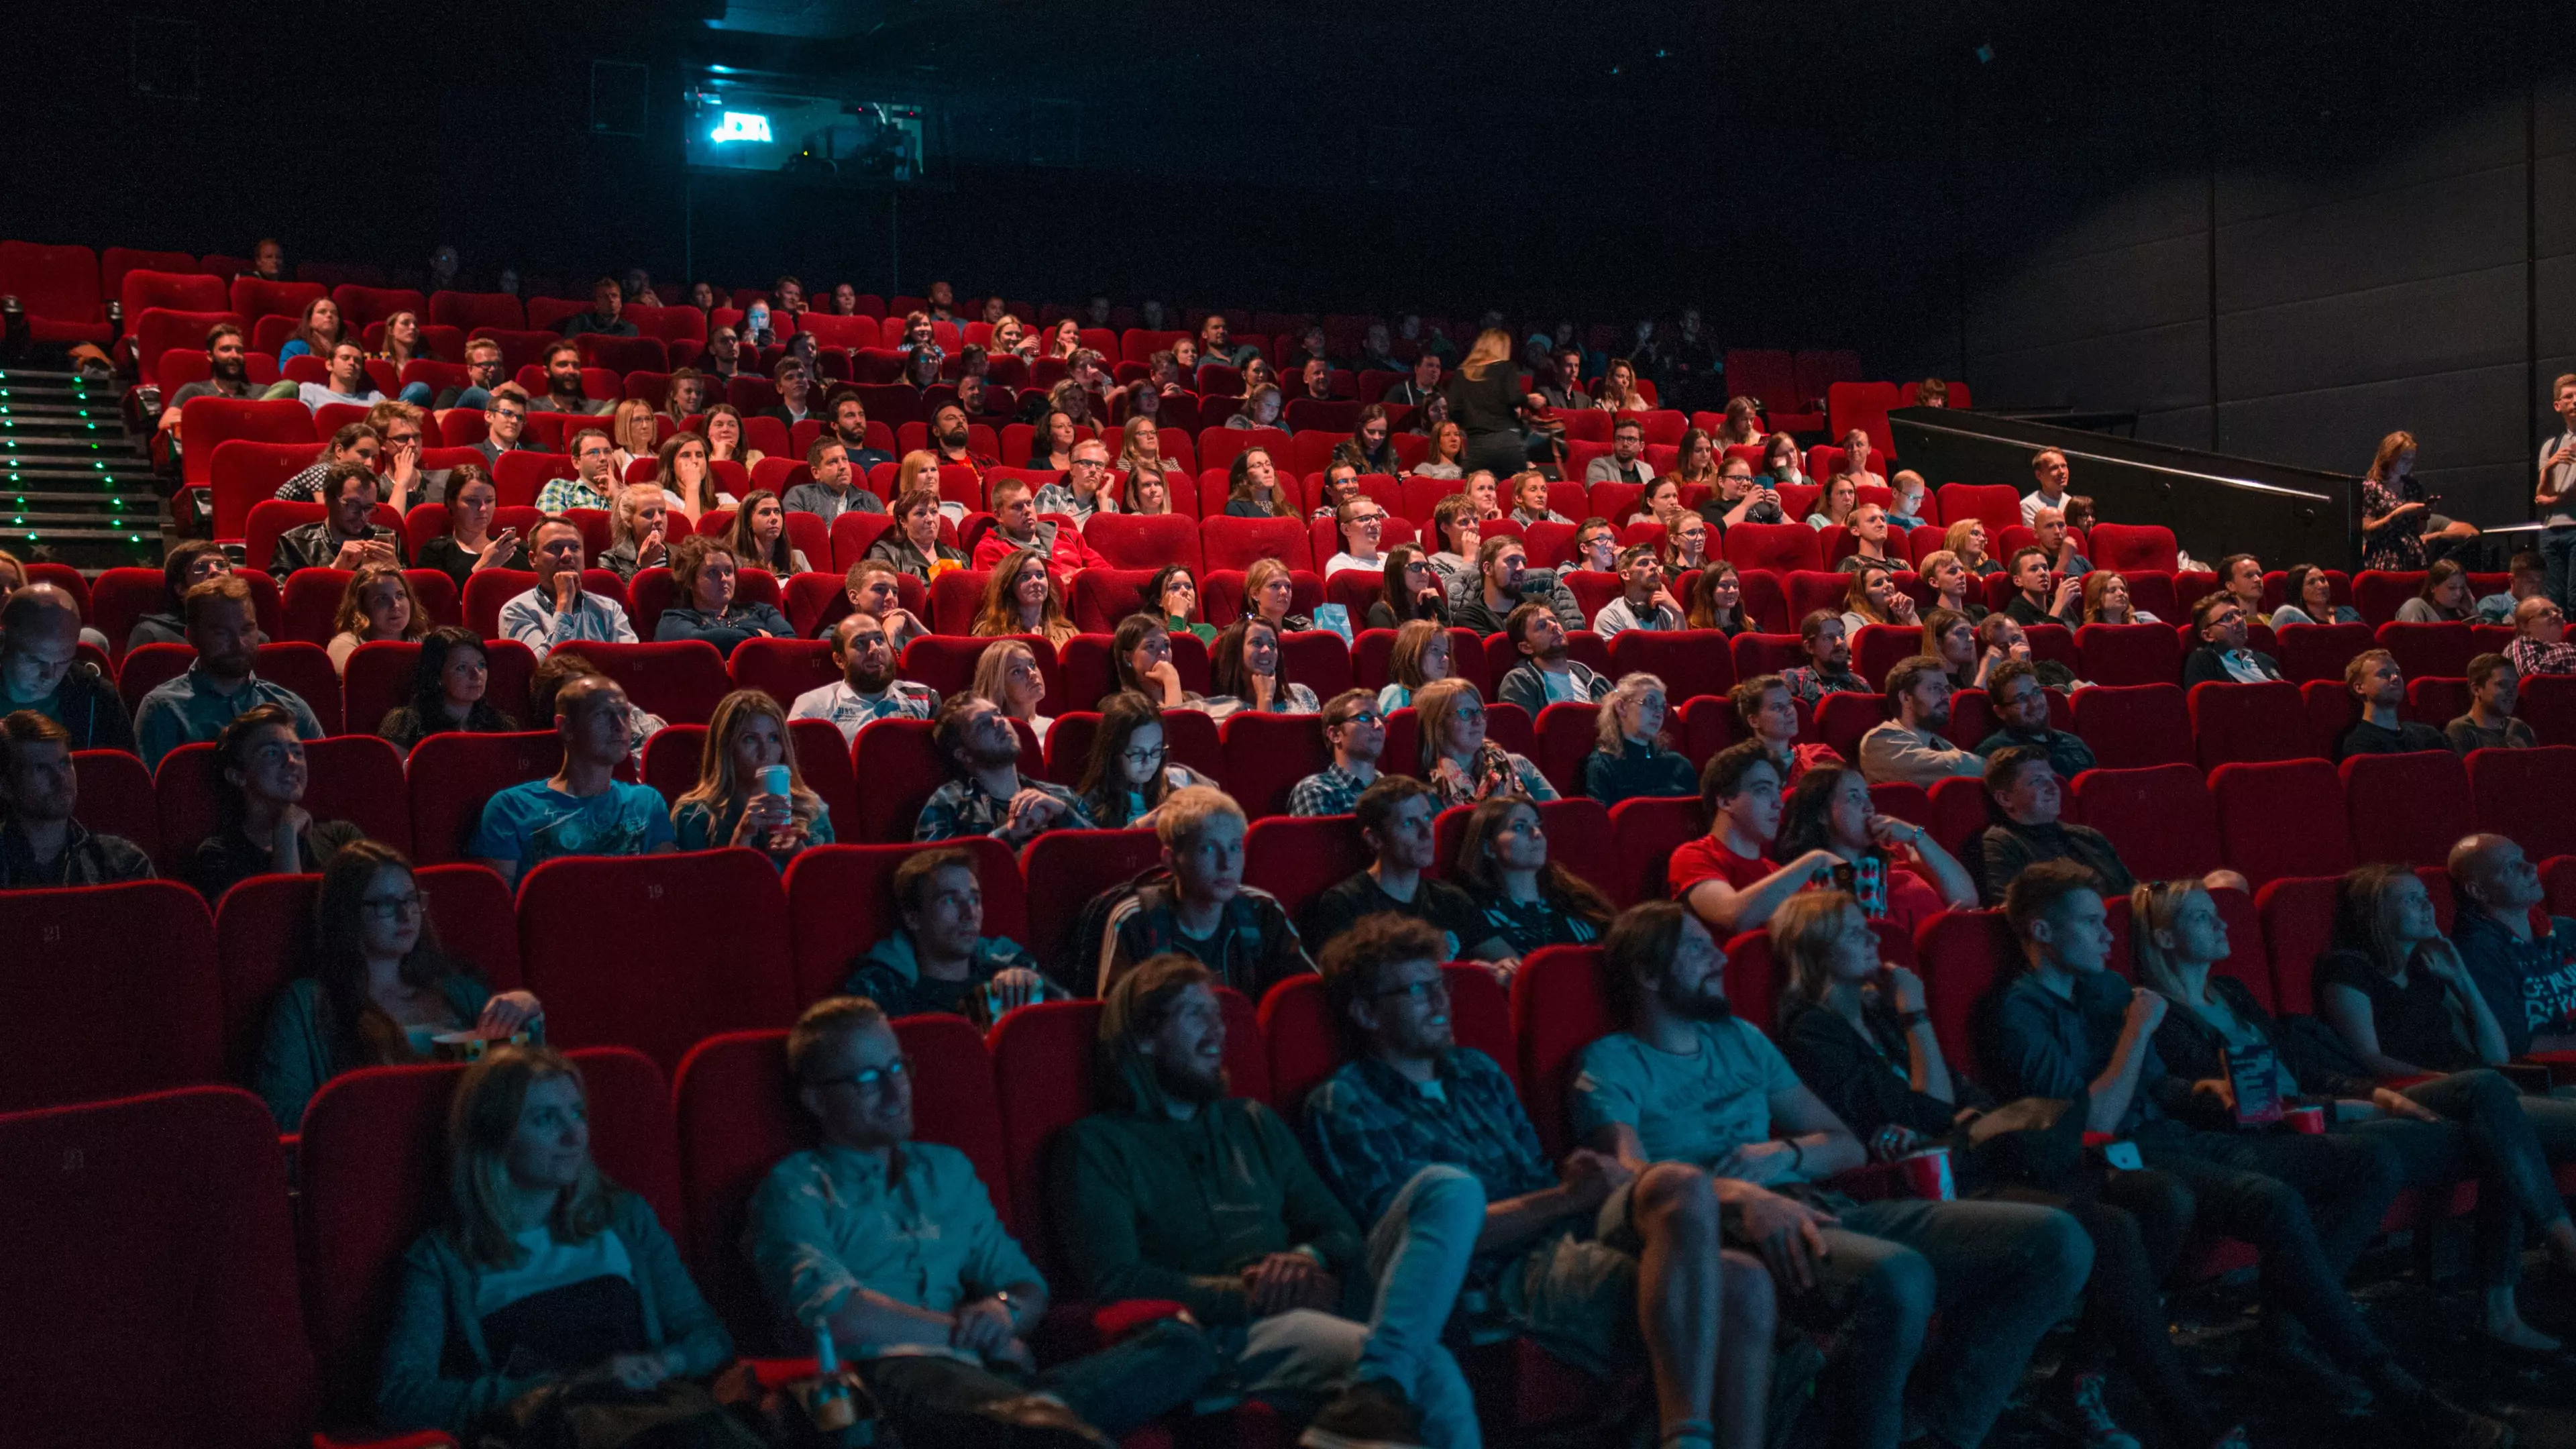 Watching A Film In The Cinema Counts As A ‘Light Work Out,’ Experts Claim